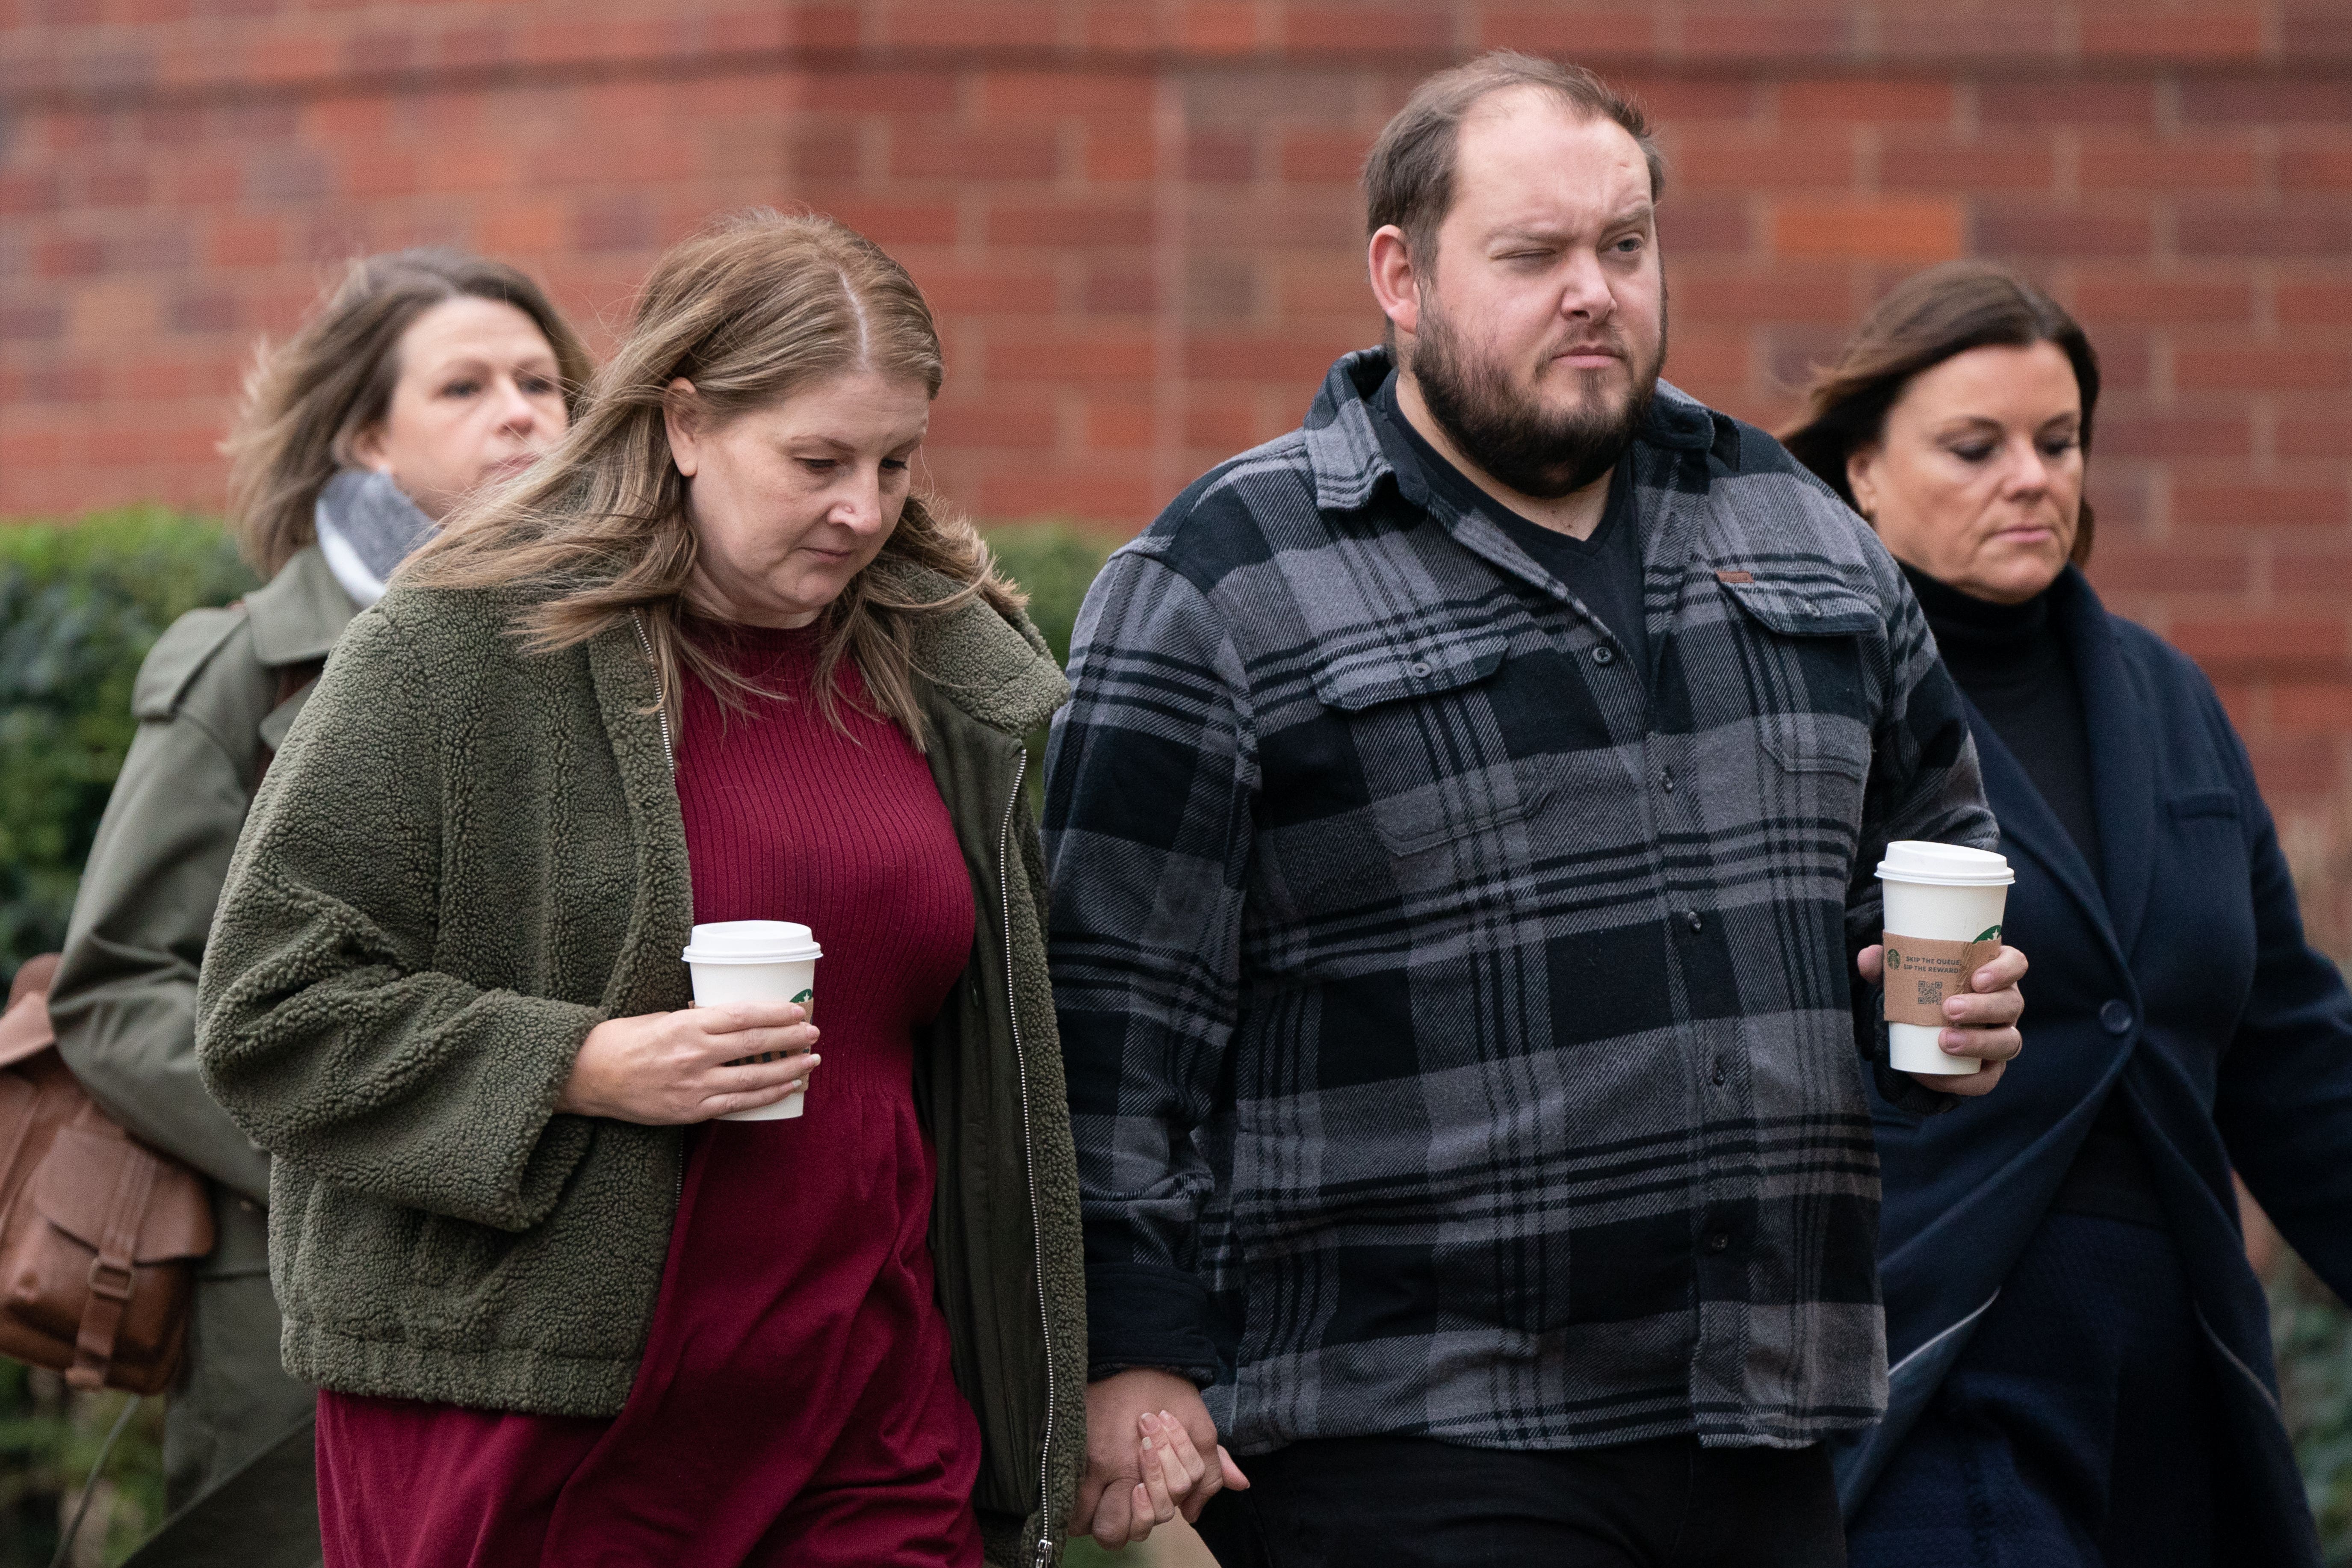 Sarah and Gary Andrews, parents of Wynter Andrews, arrive at Nottingham Magistrates’ Court on Friday (Joe Giddens/PA)